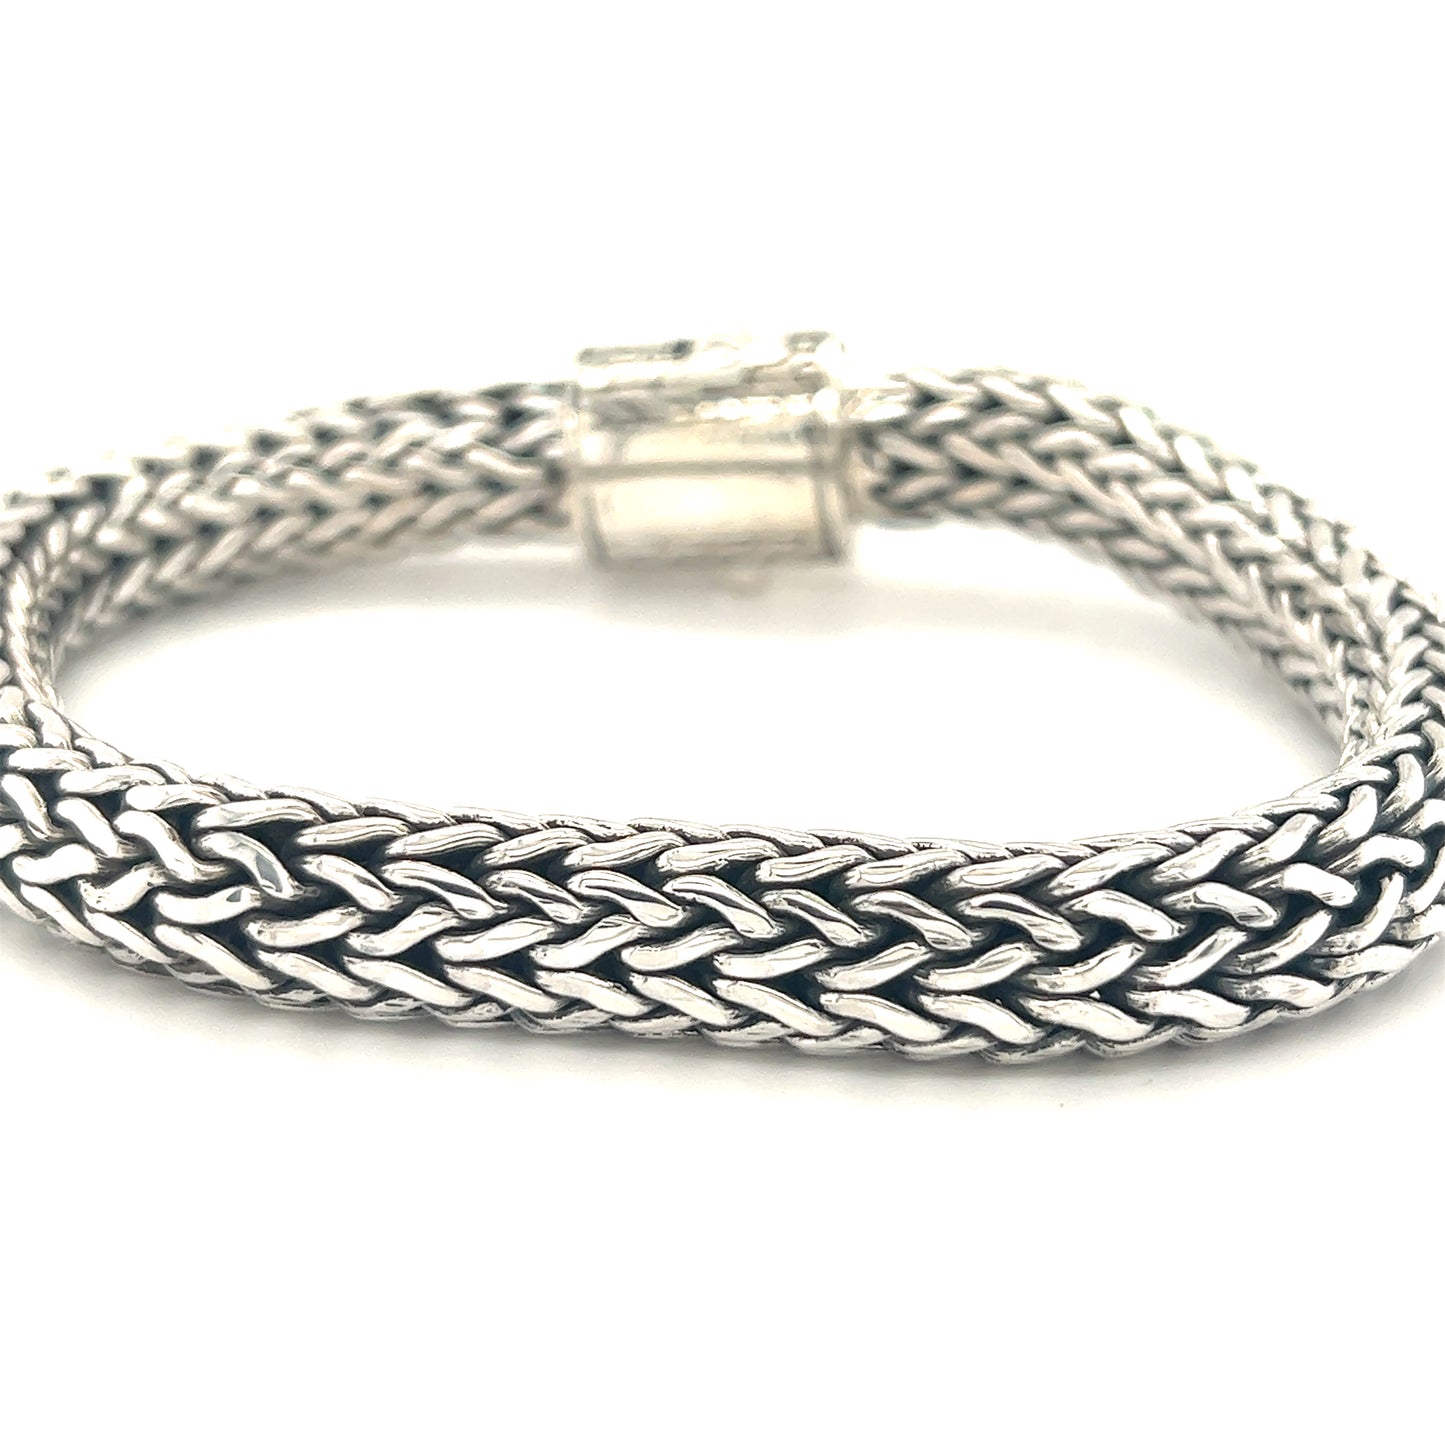 A Super Silver Heavy Braided Bracelet with a snap clasp on a white background.